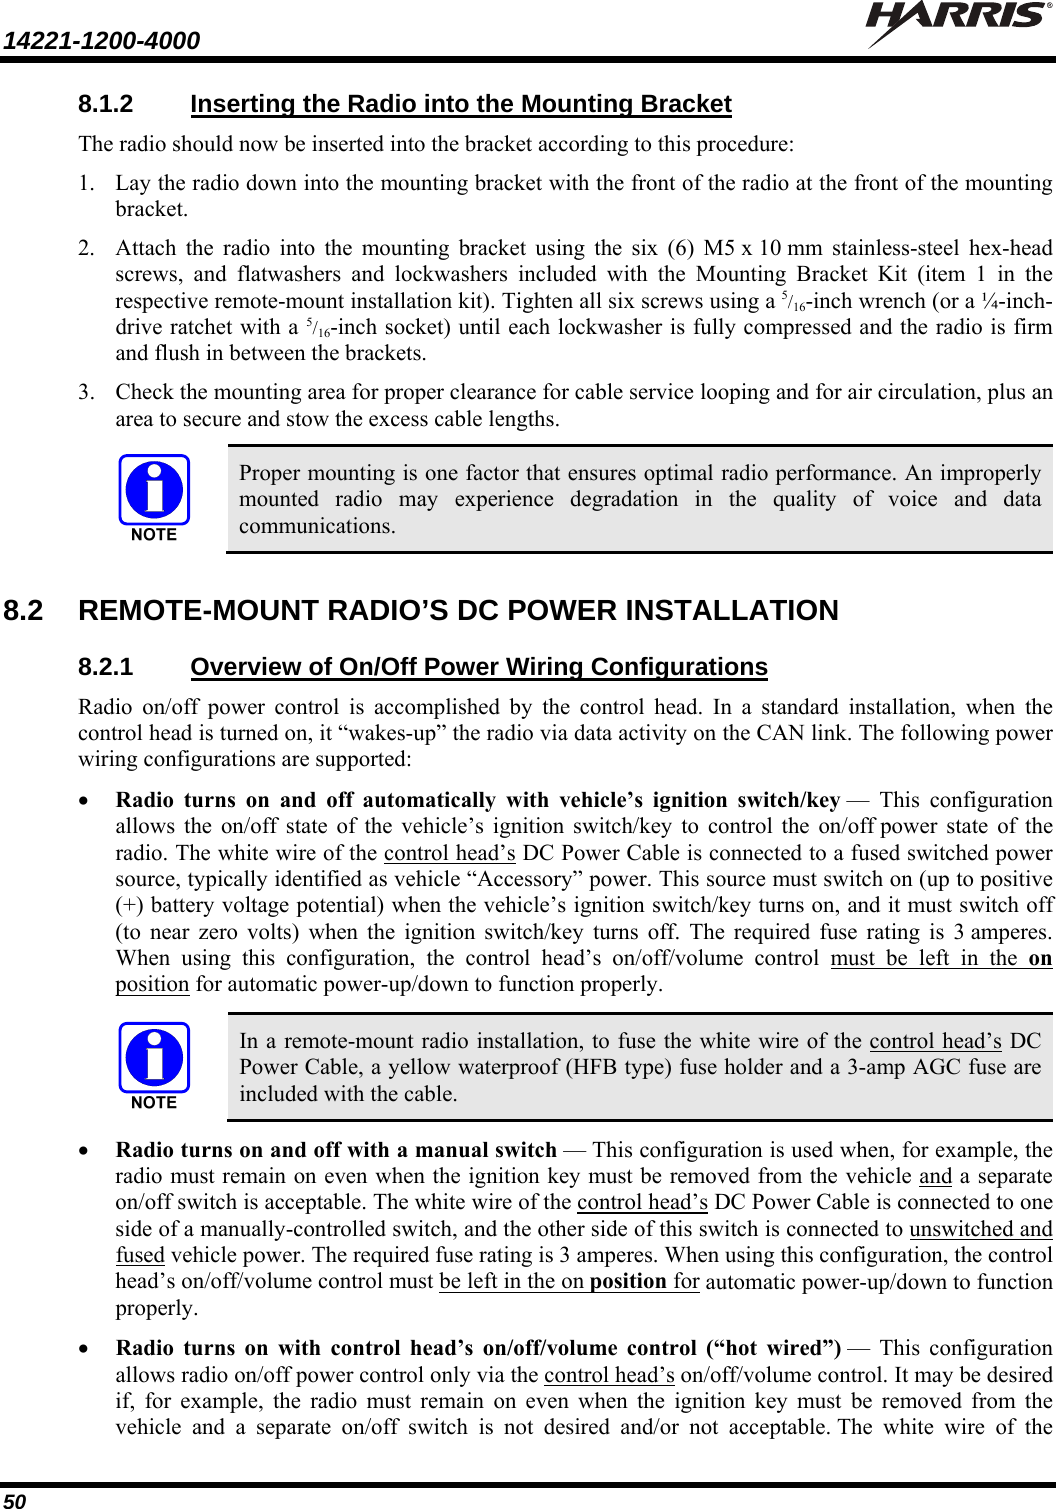 14221-1200-4000    50 8.1.2  Inserting the Radio into the Mounting Bracket The radio should now be inserted into the bracket according to this procedure: 1. Lay the radio down into the mounting bracket with the front of the radio at the front of the mounting bracket. 2. Attach the radio into the mounting bracket using the six (6) M5 x 10 mm stainless-steel hex-head screws, and flatwashers and lockwashers included with the Mounting Bracket Kit (item 1 in the respective remote-mount installation kit). Tighten all six screws using a 5/16-inch wrench (or a ¼-inch-drive ratchet with a 5/16-inch socket) until each lockwasher is fully compressed and the radio is firm and flush in between the brackets. 3. Check the mounting area for proper clearance for cable service looping and for air circulation, plus an area to secure and stow the excess cable lengths.  Proper mounting is one factor that ensures optimal radio performance. An improperly mounted radio may experience degradation in the quality of voice and data communications.  8.2  REMOTE-MOUNT RADIO’S DC POWER INSTALLATION 8.2.1 Overview of On/Off Power Wiring Configurations Radio on/off power control is accomplished by the control head. In a standard installation, when the control head is turned on, it “wakes-up” the radio via data activity on the CAN link. The following power wiring configurations are supported:  Radio turns on and off automatically with vehicle’s ignition switch/key — This configuration allows the on/off state of the vehicle’s ignition switch/key to control the on/off power state of the radio. The white wire of the control head’s DC Power Cable is connected to a fused switched power source, typically identified as vehicle “Accessory” power. This source must switch on (up to positive (+) battery voltage potential) when the vehicle’s ignition switch/key turns on, and it must switch off (to near zero volts) when the ignition switch/key turns off. The required fuse rating is 3 amperes. When using this configuration, the control head’s on/off/volume control must be left in the on position for automatic power-up/down to function properly.   In a remote-mount radio installation, to fuse the white wire of the control head’s DC Power Cable, a yellow waterproof (HFB type) fuse holder and a 3-amp AGC fuse are included with the cable.  Radio turns on and off with a manual switch — This configuration is used when, for example, the radio must remain on even when the ignition key must be removed from the vehicle and a separate on/off switch is acceptable. The white wire of the control head’s DC Power Cable is connected to one side of a manually-controlled switch, and the other side of this switch is connected to unswitched and fused vehicle power. The required fuse rating is 3 amperes. When using this configuration, the control head’s on/off/volume control must be left in the on position for automatic power-up/down to function properly.  Radio turns on with control head’s on/off/volume control (“hot wired”) — This configuration allows radio on/off power control only via the control head’s on/off/volume control. It may be desired if, for example, the radio must remain on even when the ignition key must be removed from the vehicle and a separate on/off switch is not desired and/or not acceptable. The white wire of the 